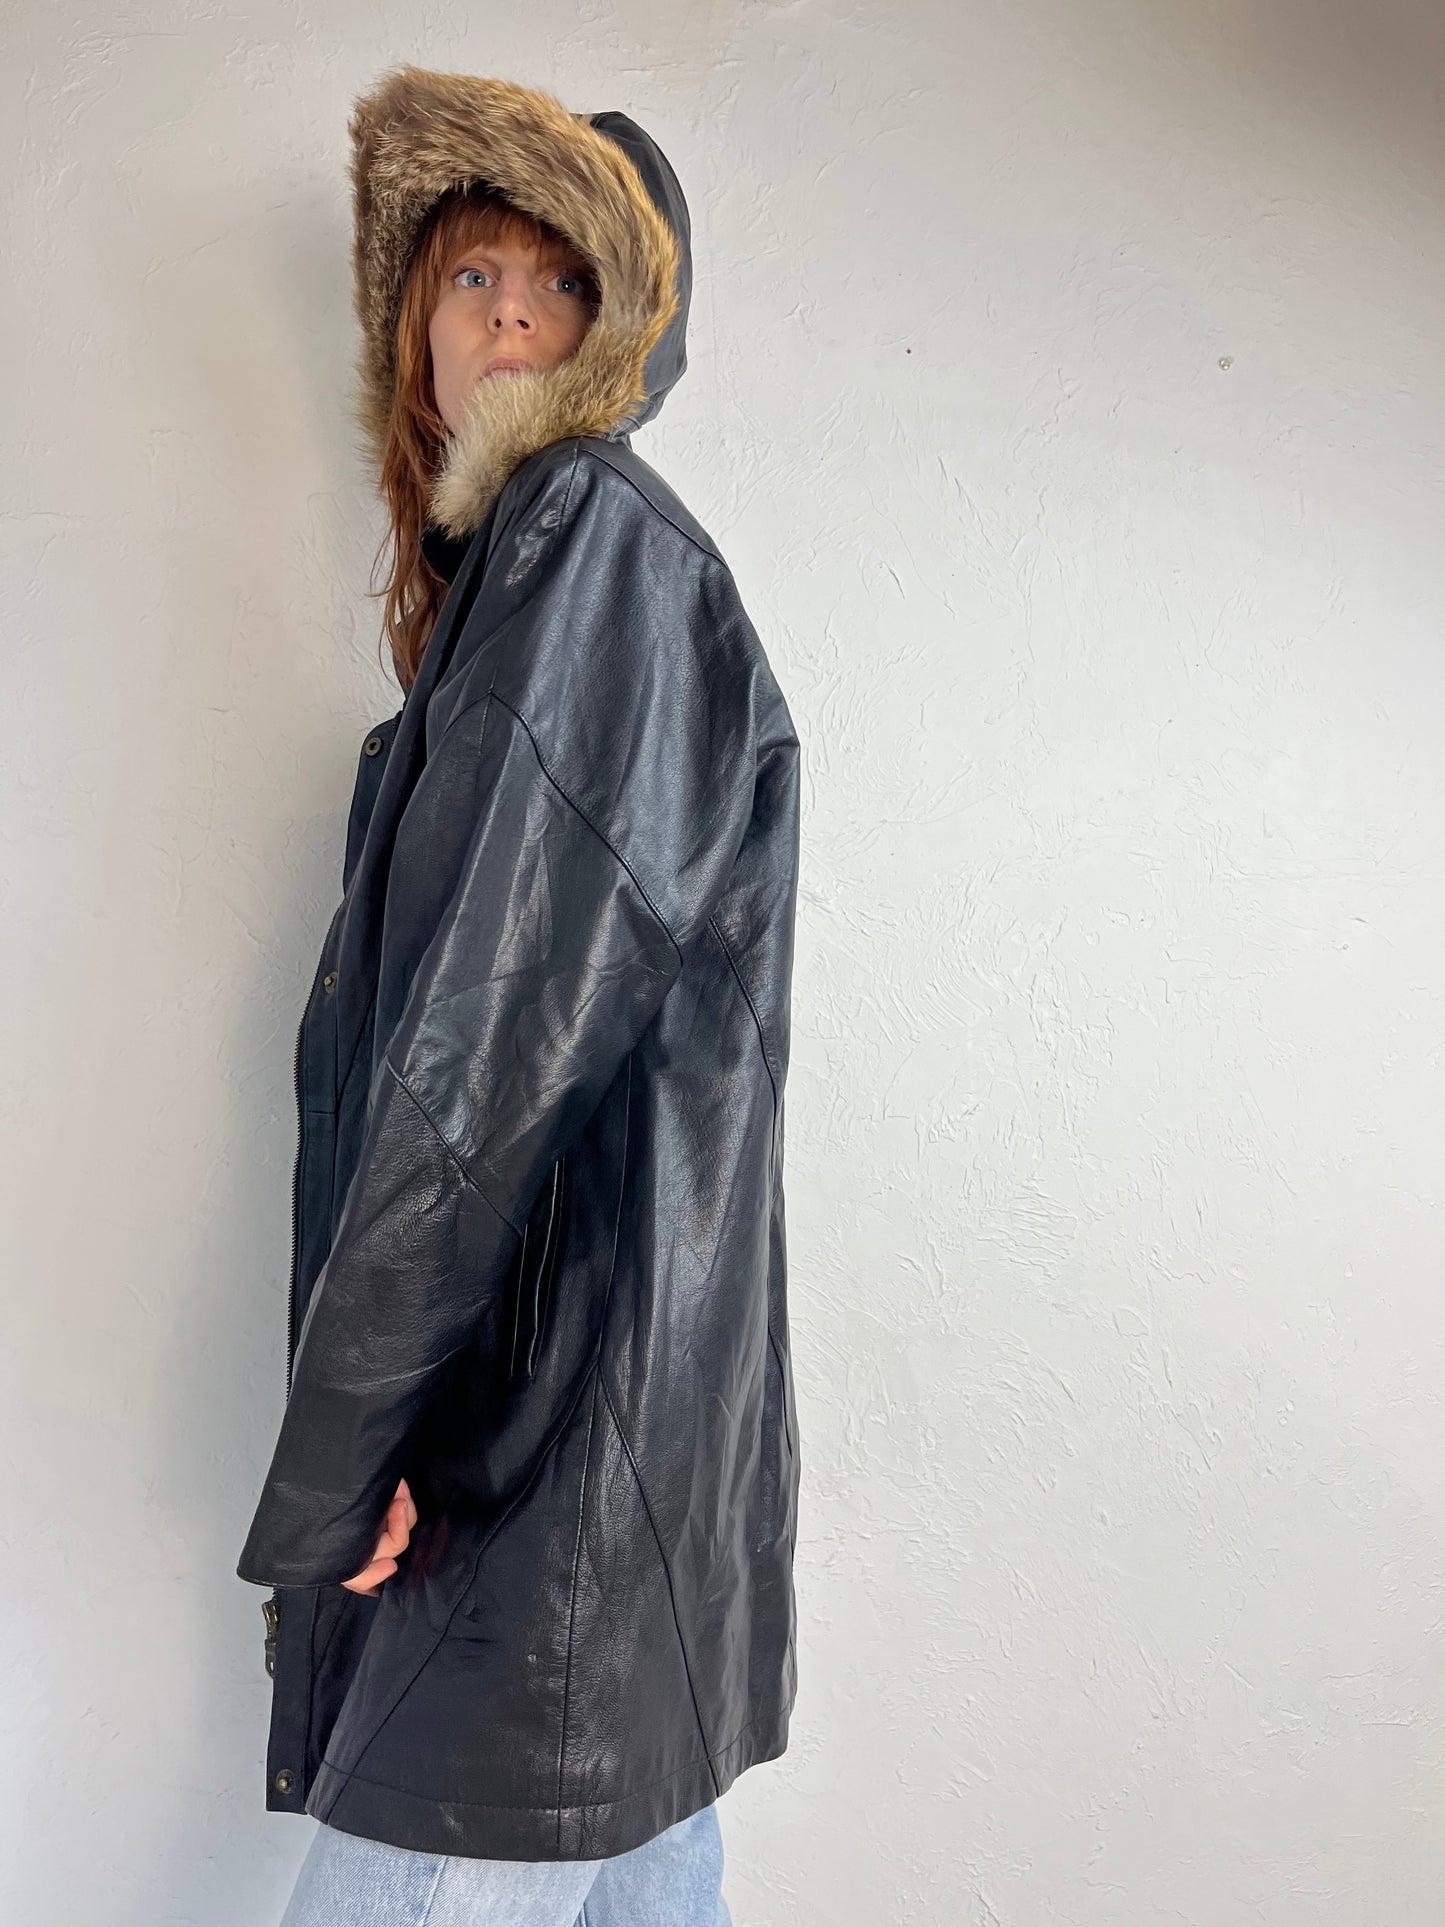 90s Y2K 'Paola Tocci' Black Leather Parka / Large